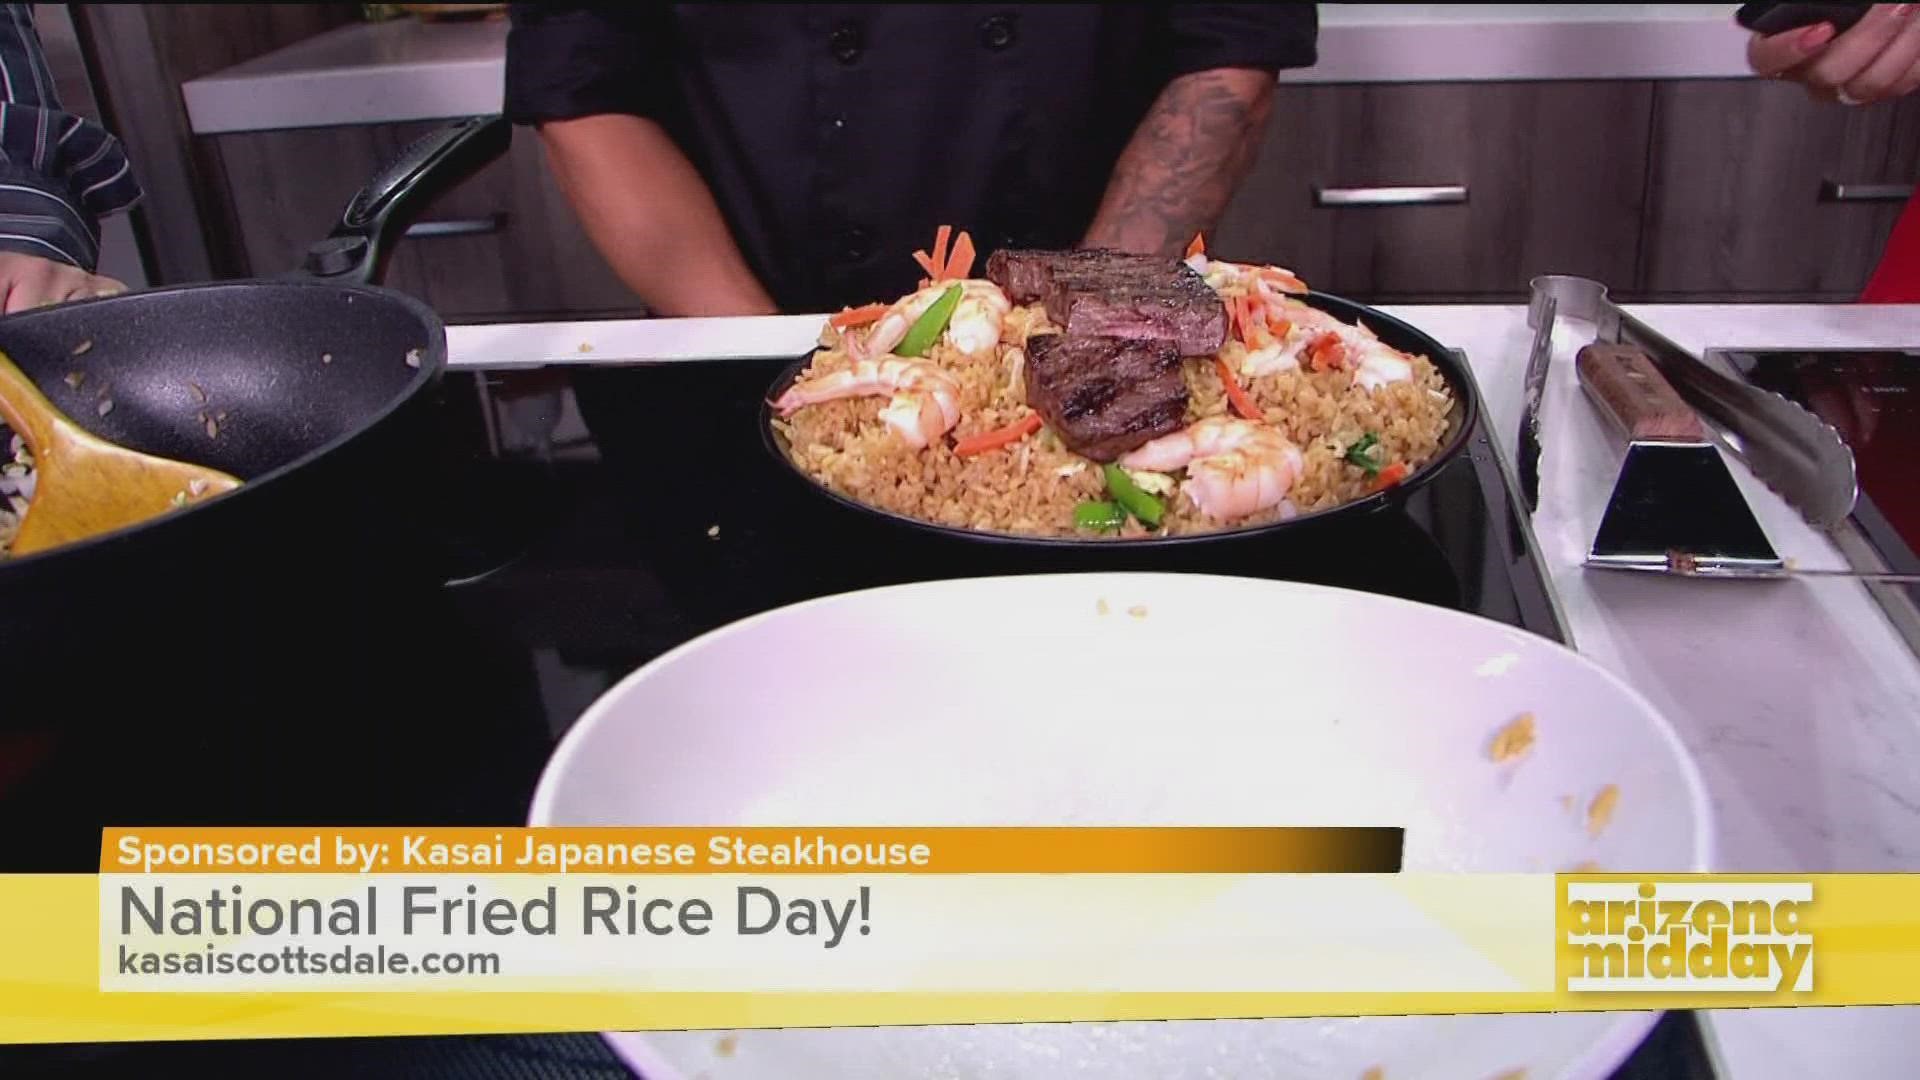 Jesse Sosa and Mike Russello from Kasai Japanese Steakhouse show us how to make the perfect fried rice.